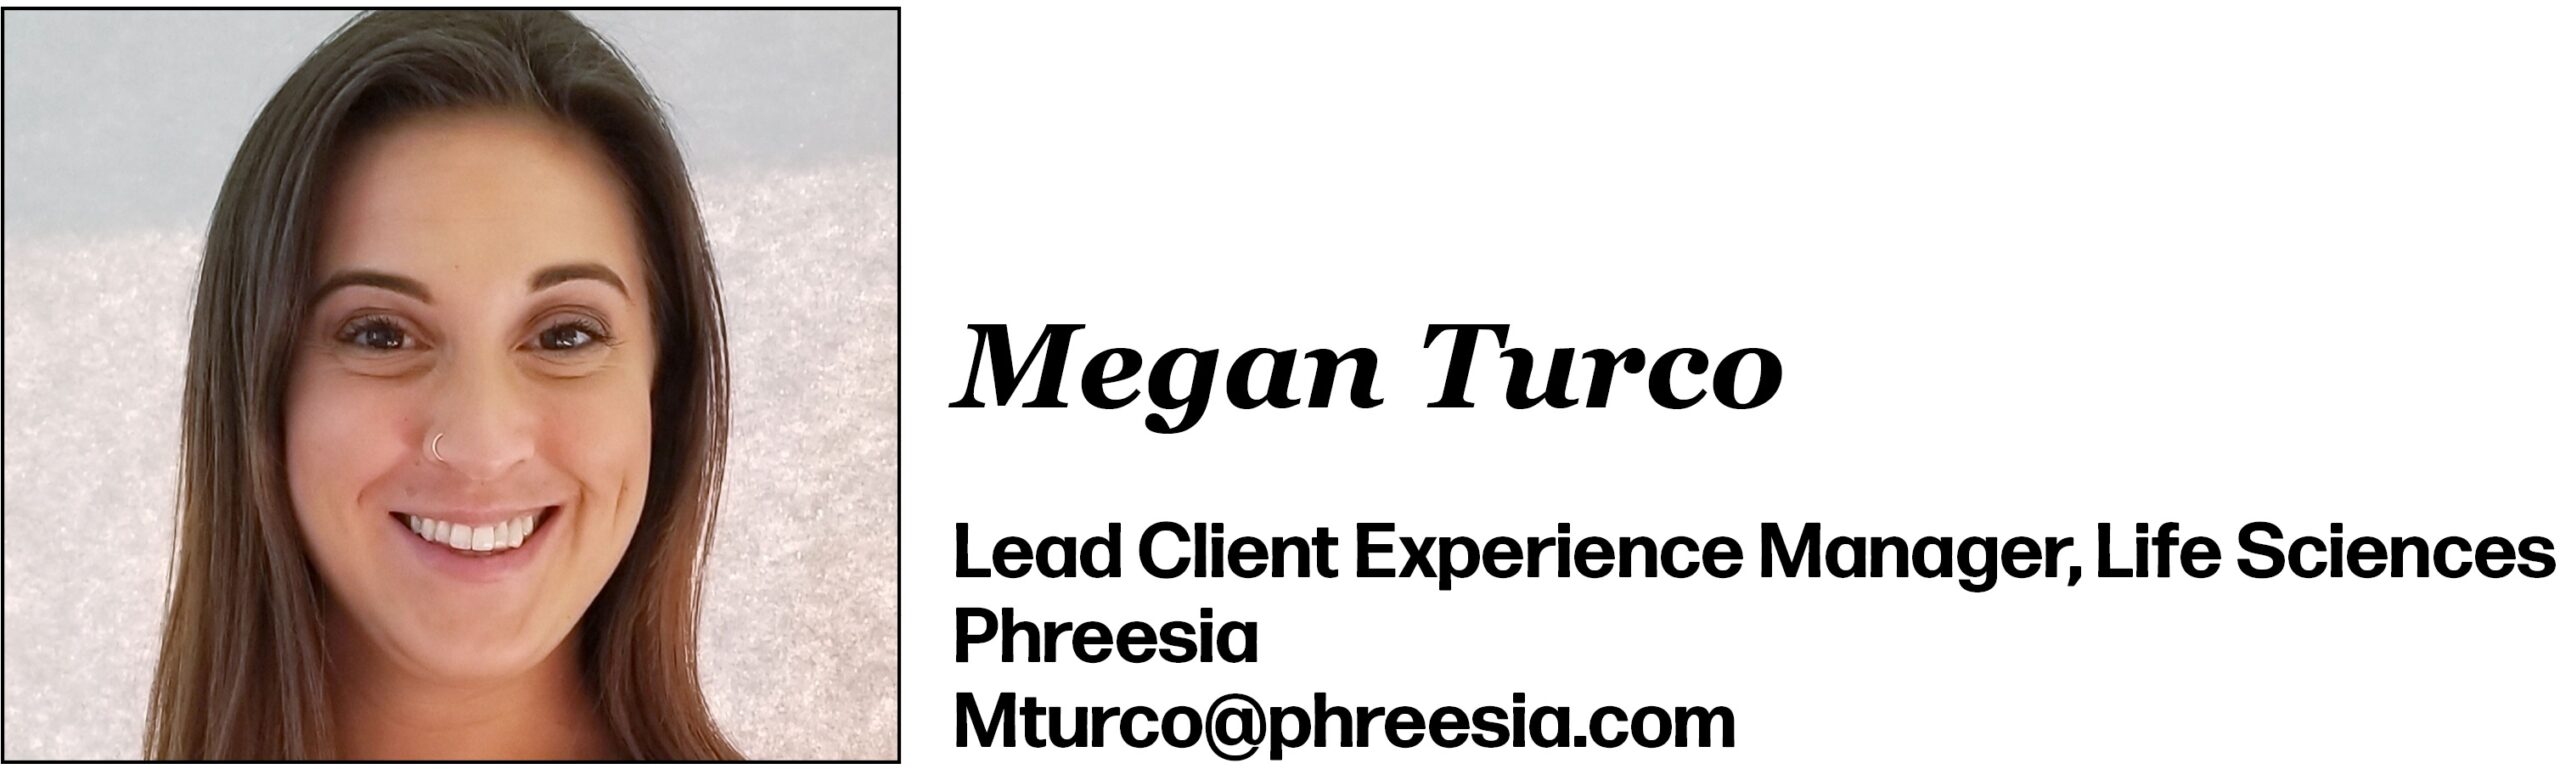 Megan Turco is Lead Client Experience Manager, Life Sciences at Phreesia. Her email is Mturco@phreesia.com. 